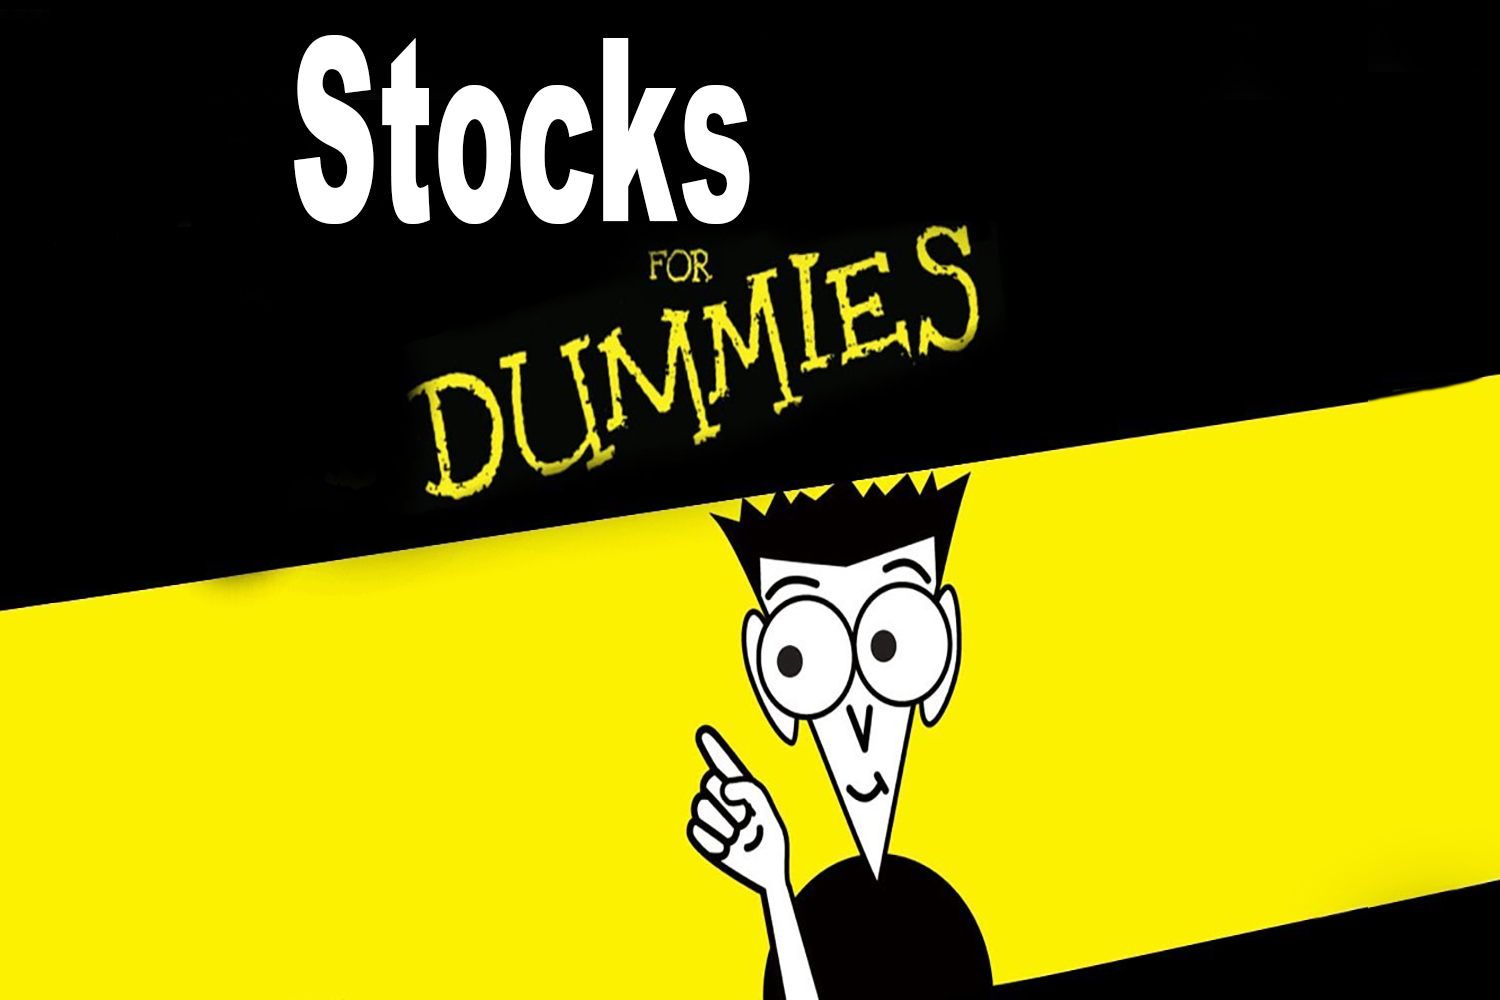 Stocks for Dummies, a creation by Cav Lemasters